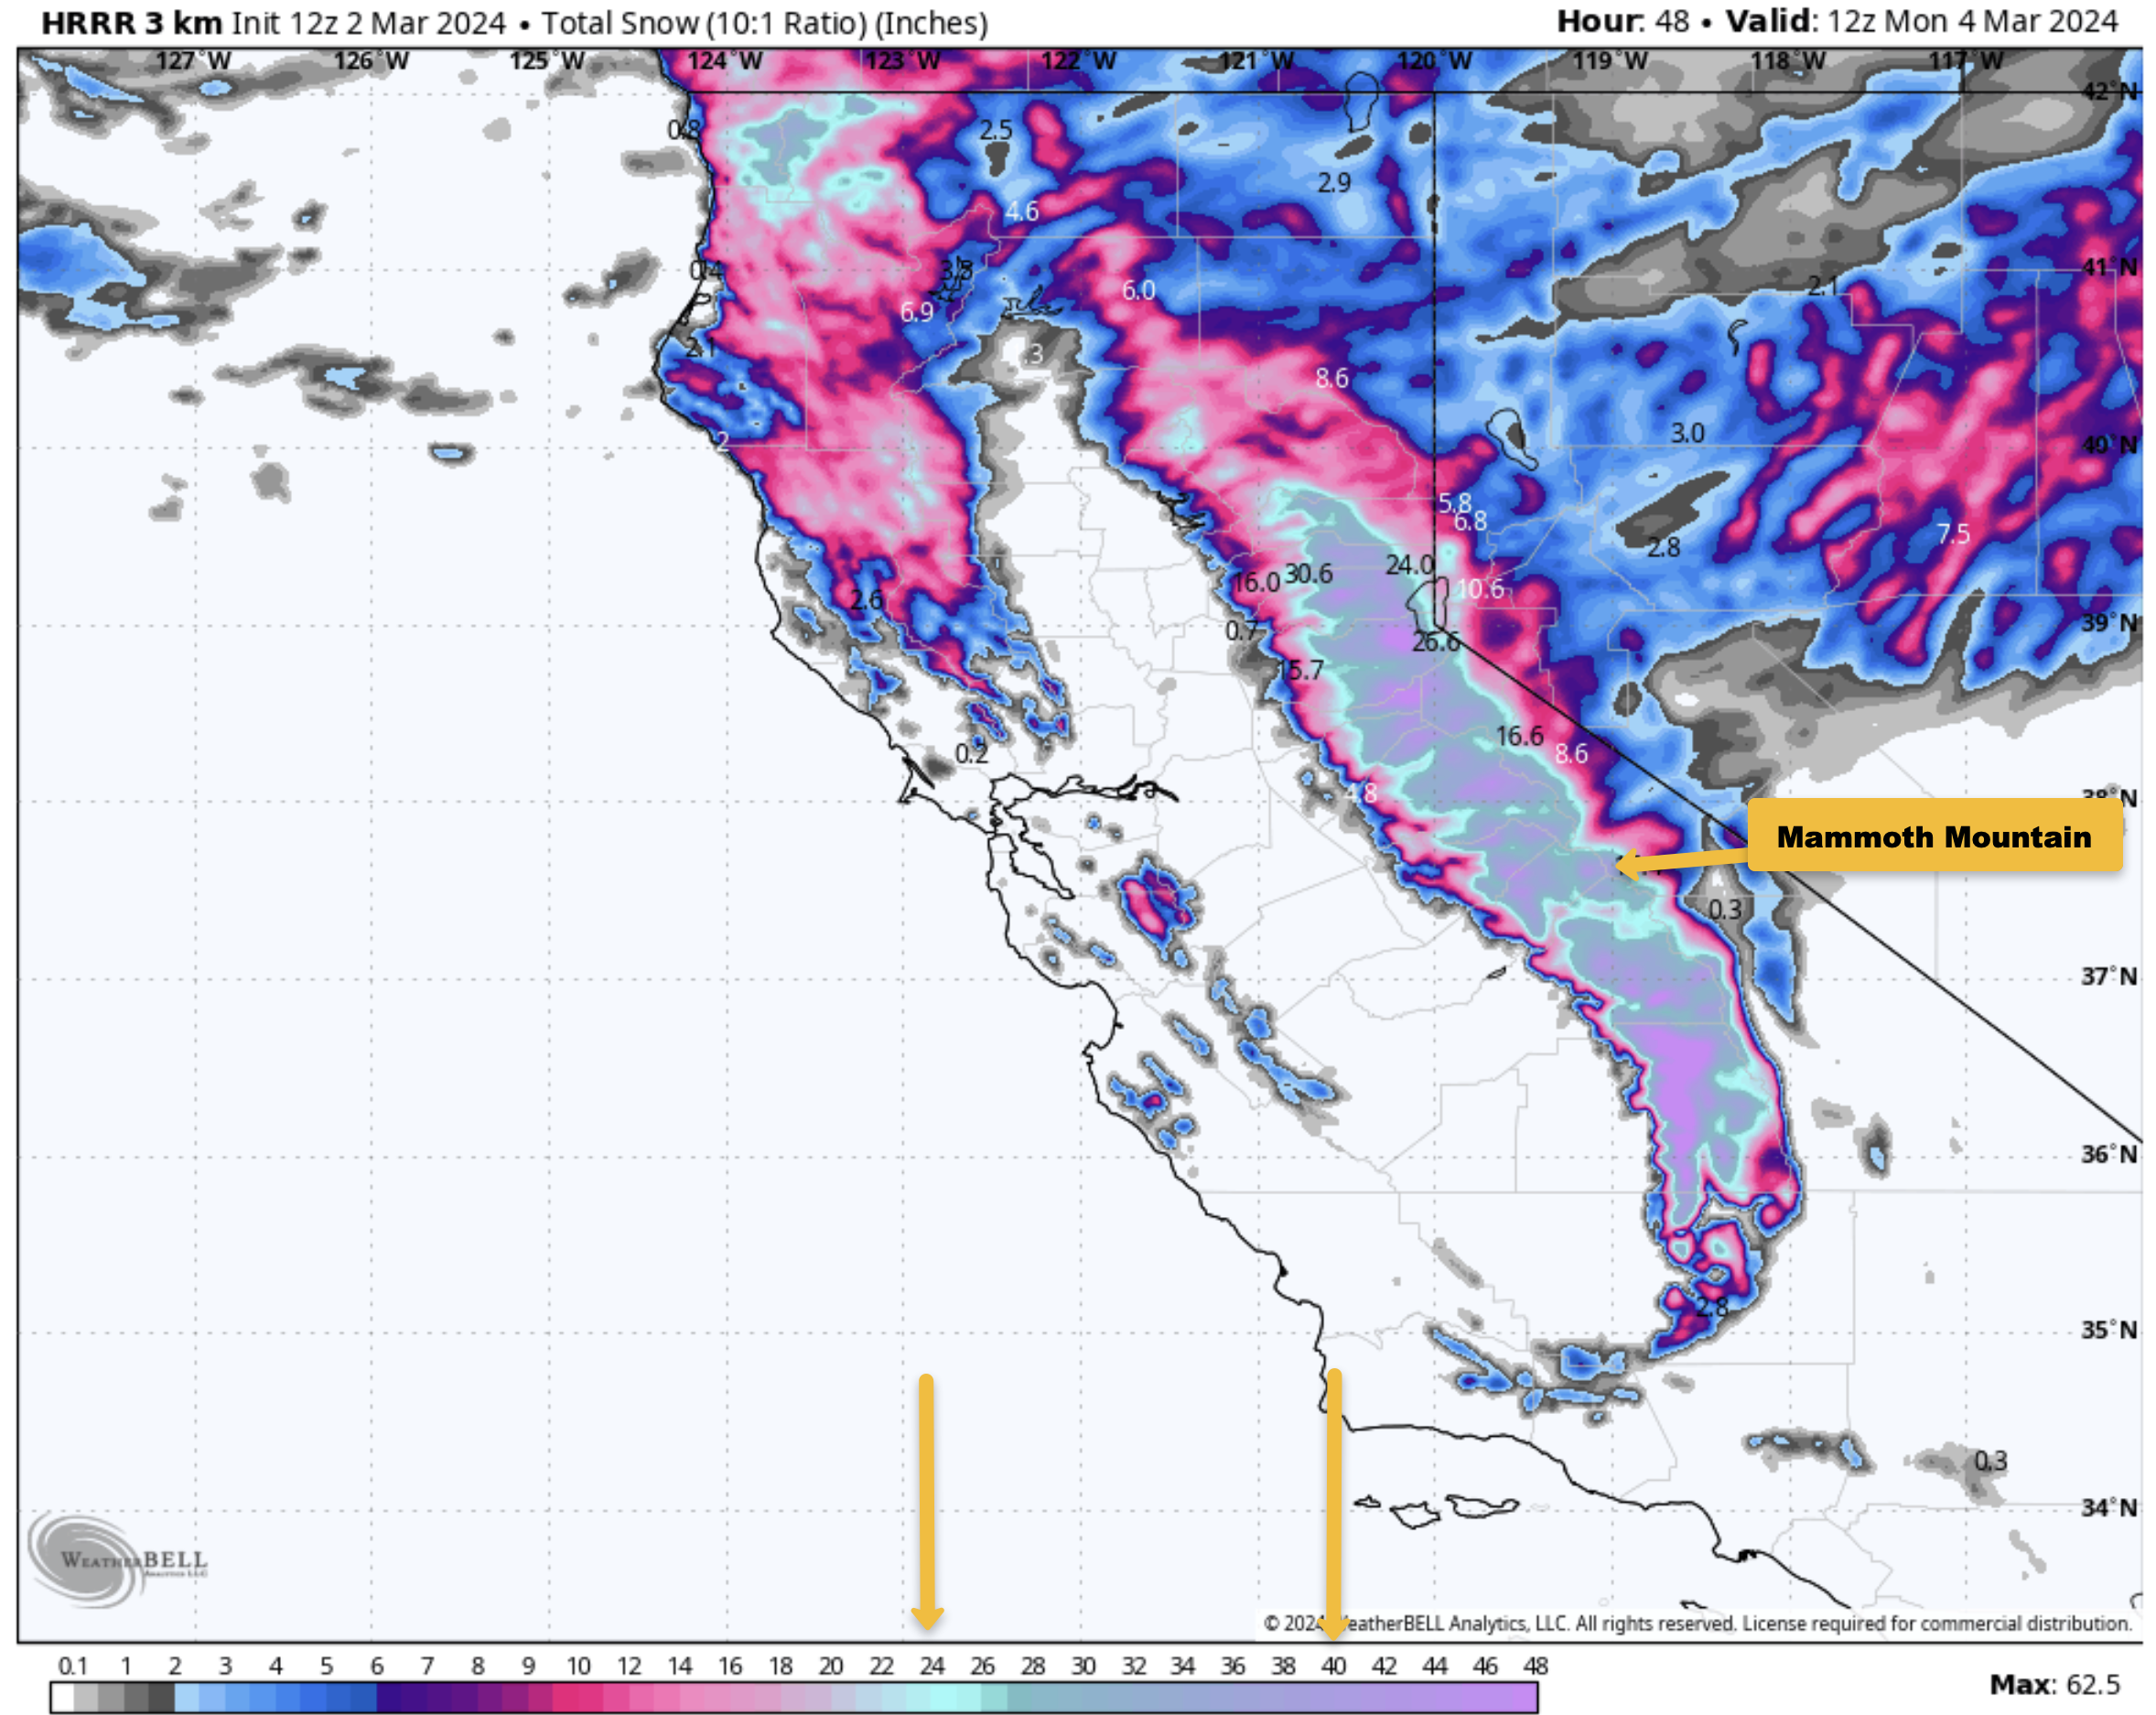 The HRRR Model has 2-3 feet of additional Snowfall with up to 4 feet over the top and the Sierra Crest down to Bishop.